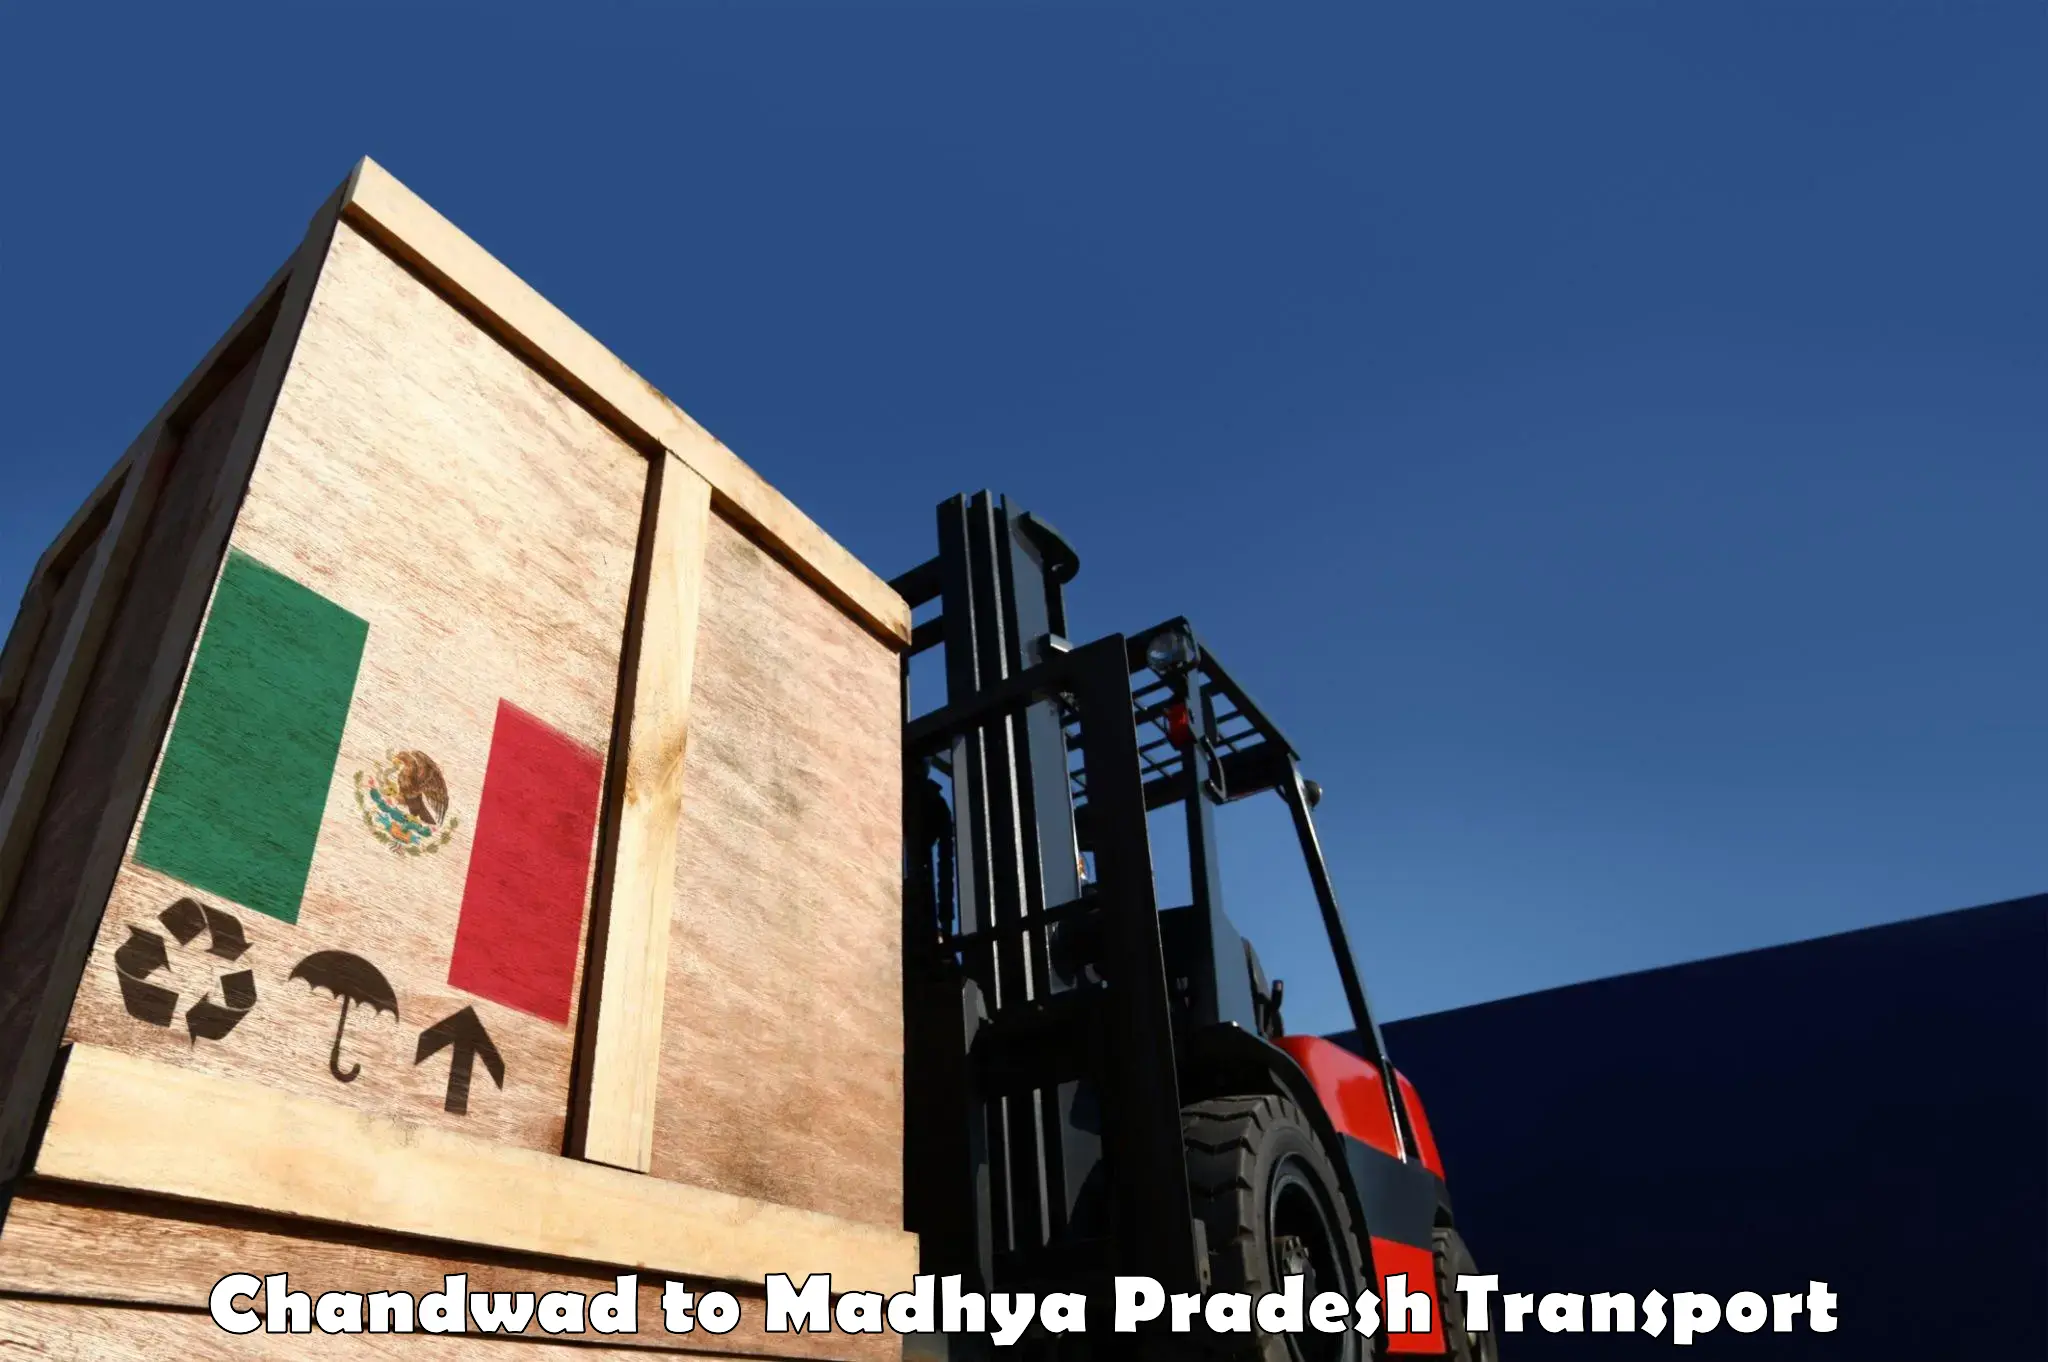 Truck transport companies in India Chandwad to Malanjkhand